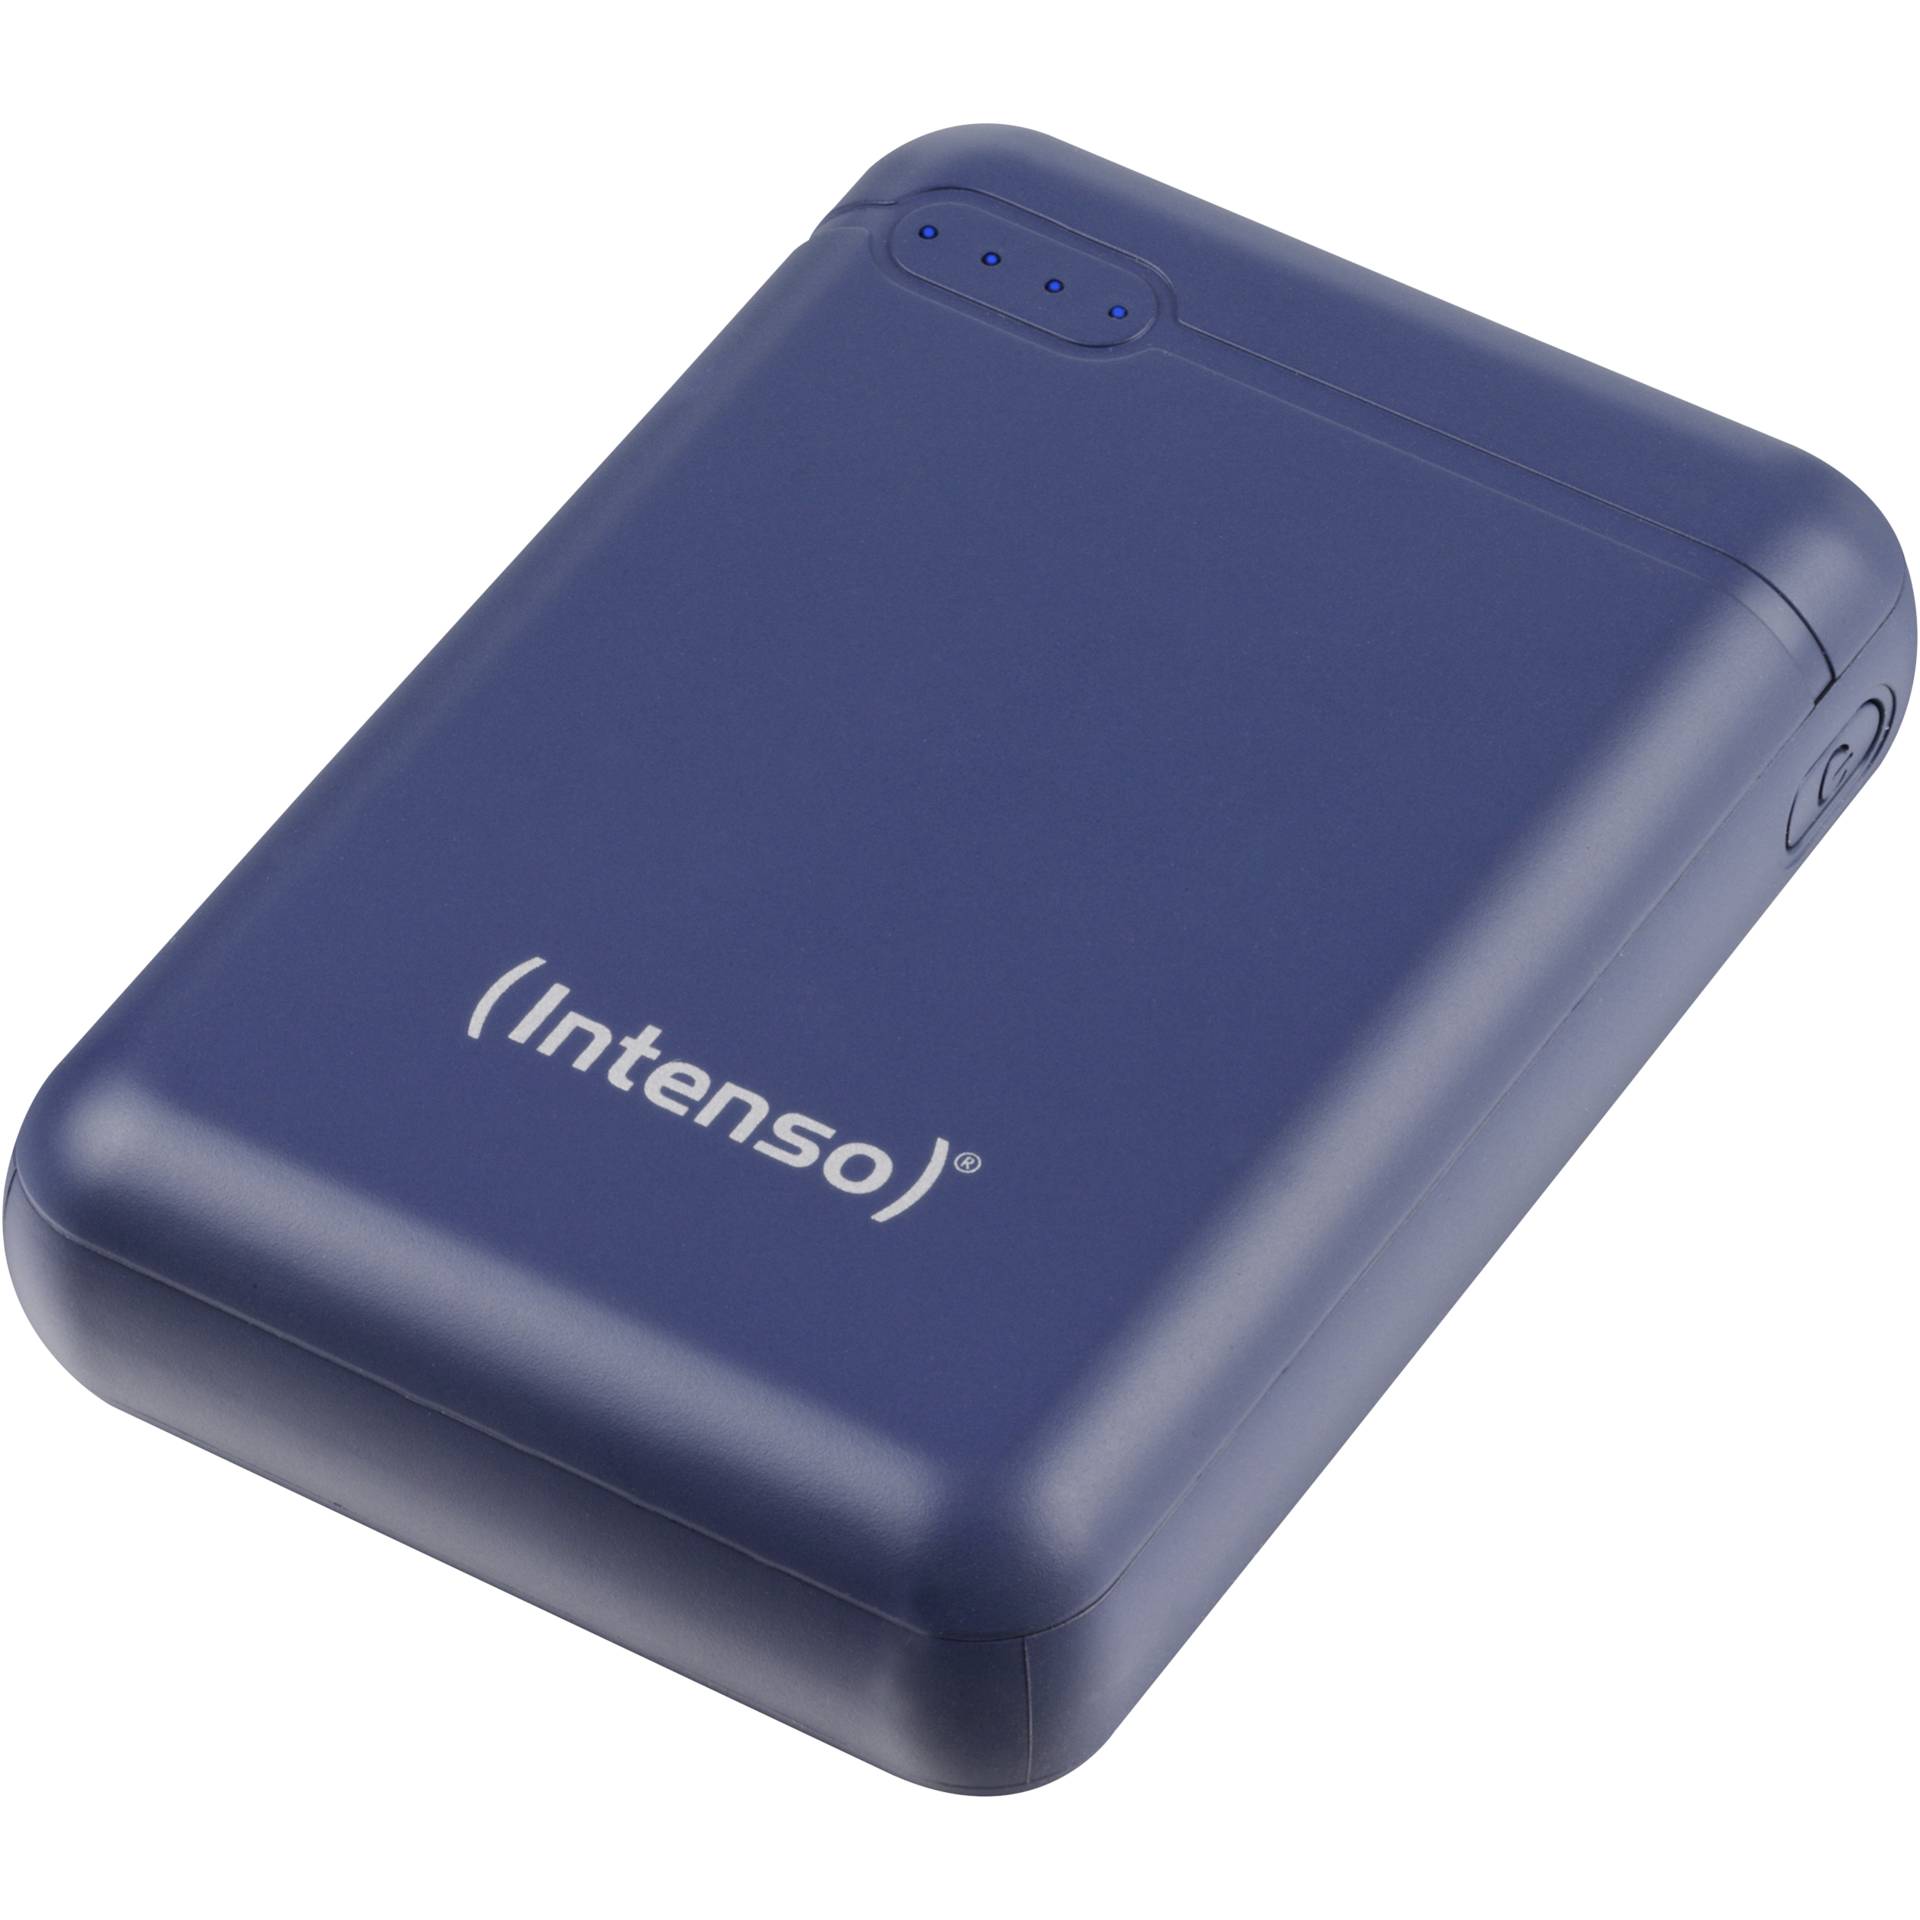 Intenso Powerbank XS10000 dkblue 10000 mAh incl. USB-A to Ty